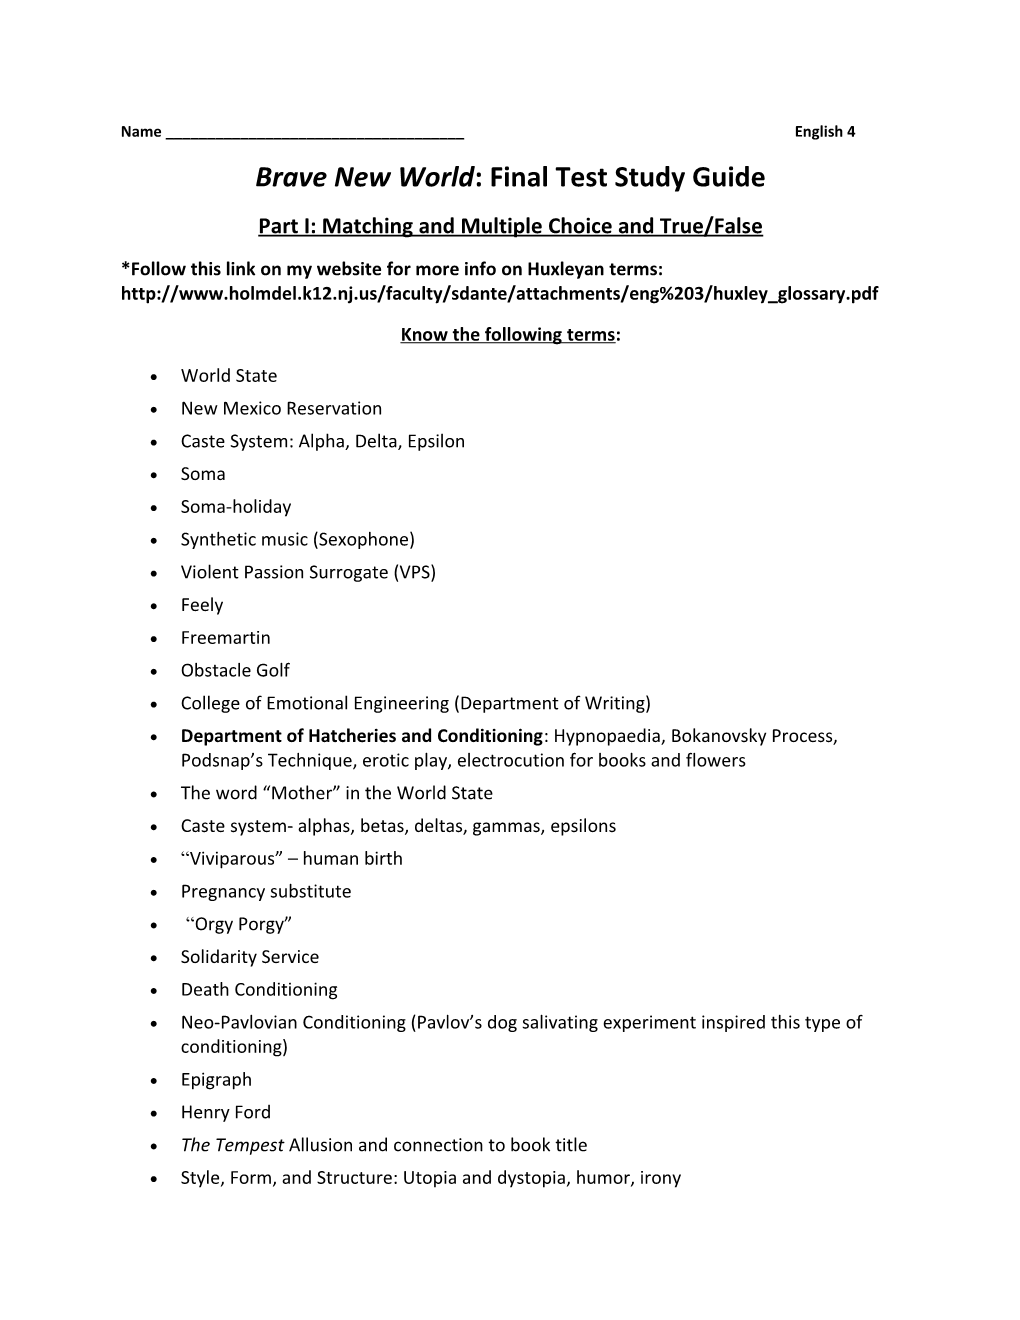 Brave New World: Final Test Study Guide